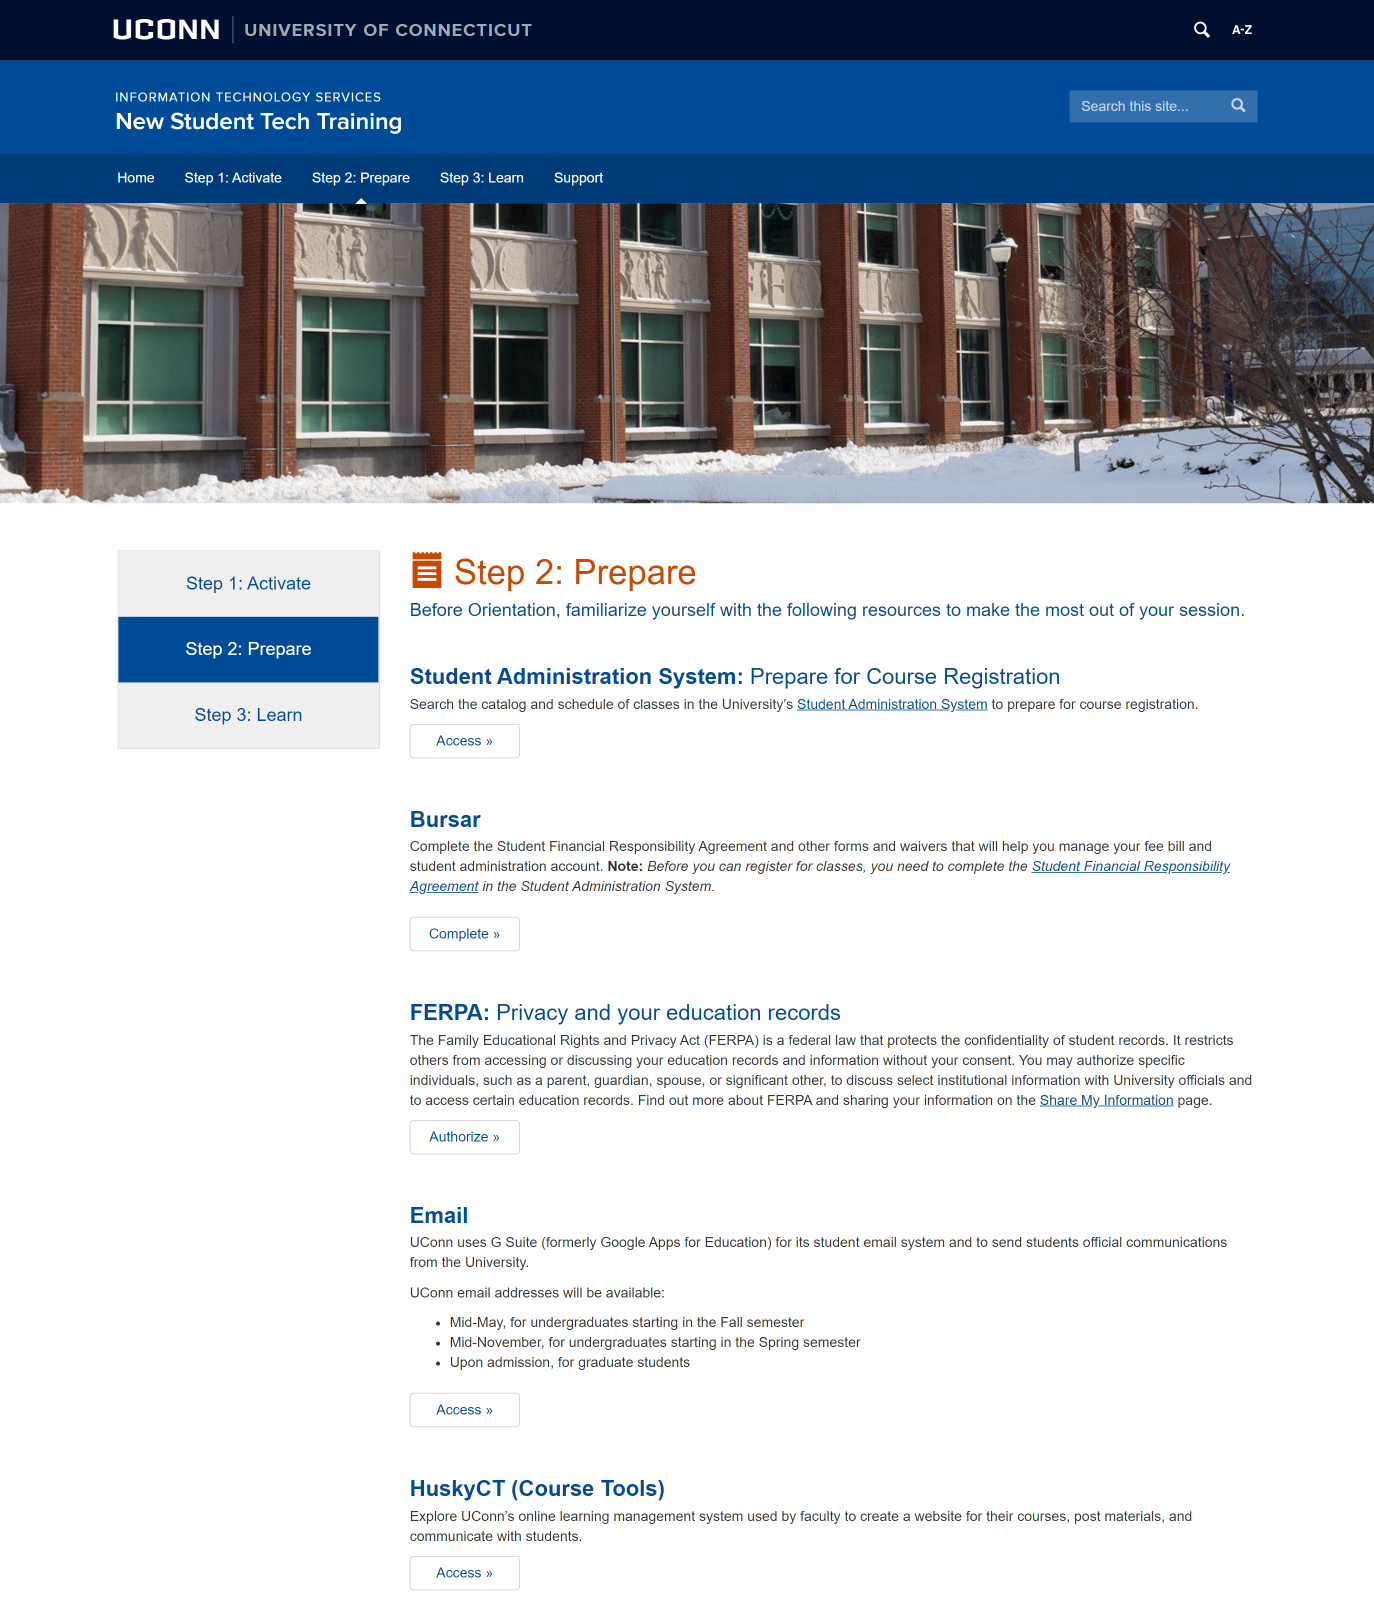 Screenshot of an interior page of the Tech Training website